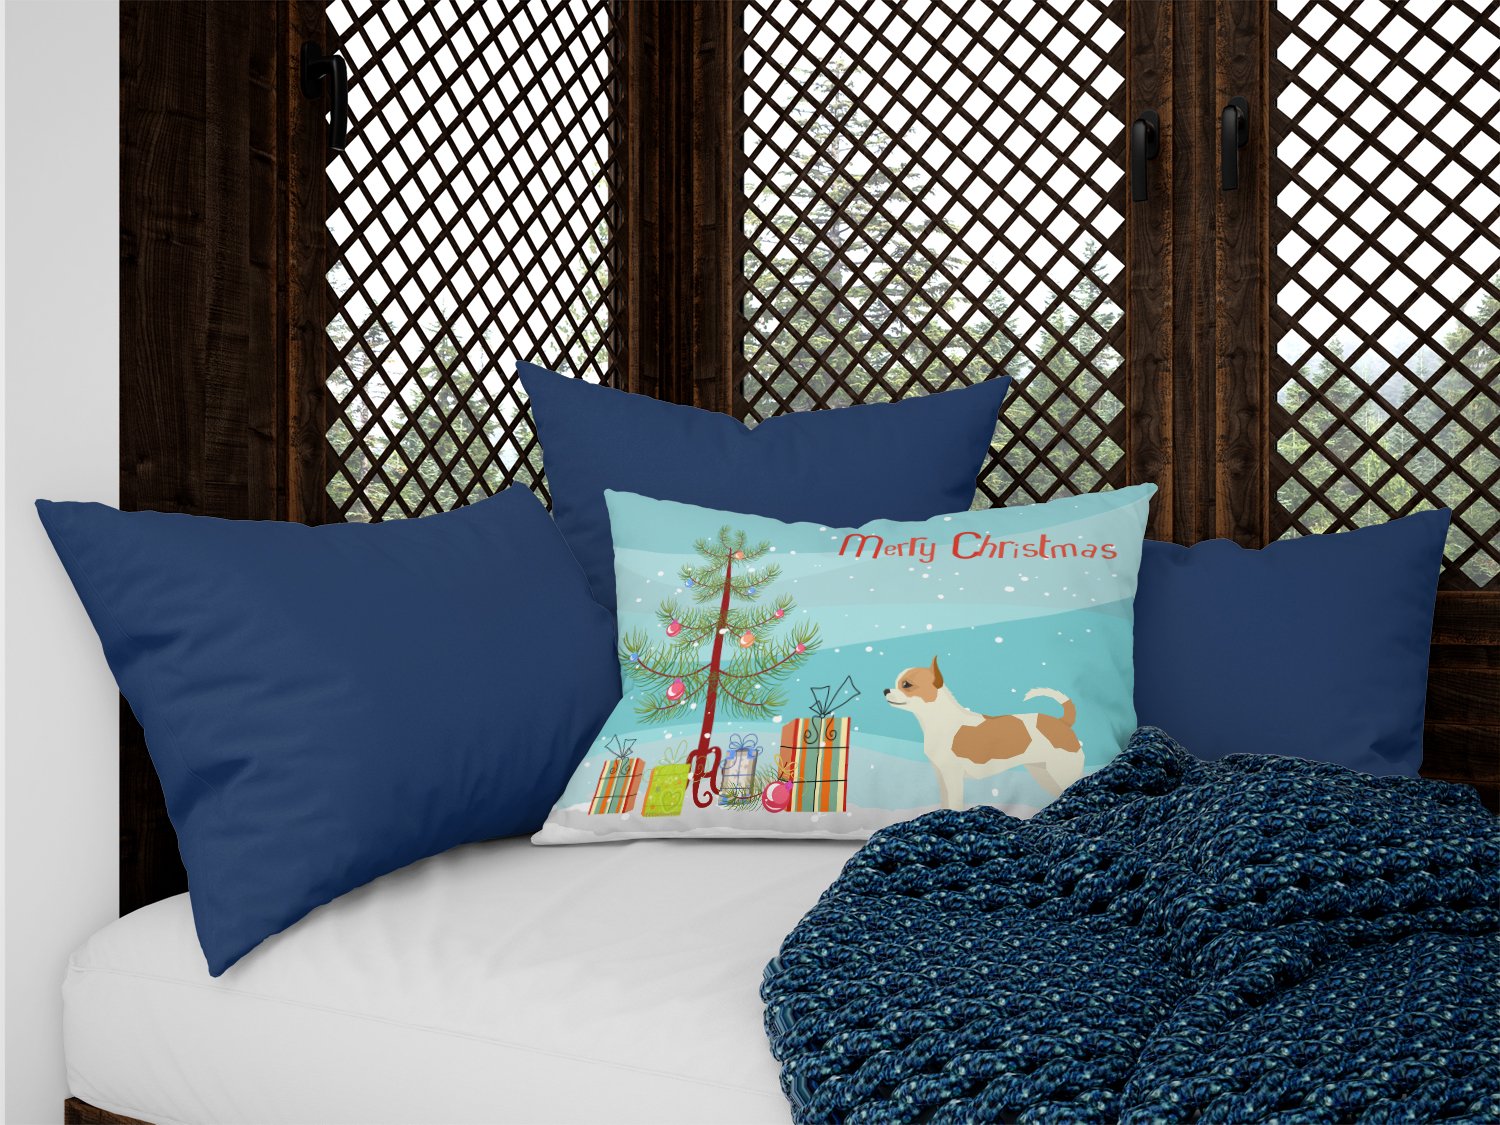 Chihuahua Christmas Tree Canvas Fabric Decorative Pillow CK3530PW1216 by Caroline's Treasures